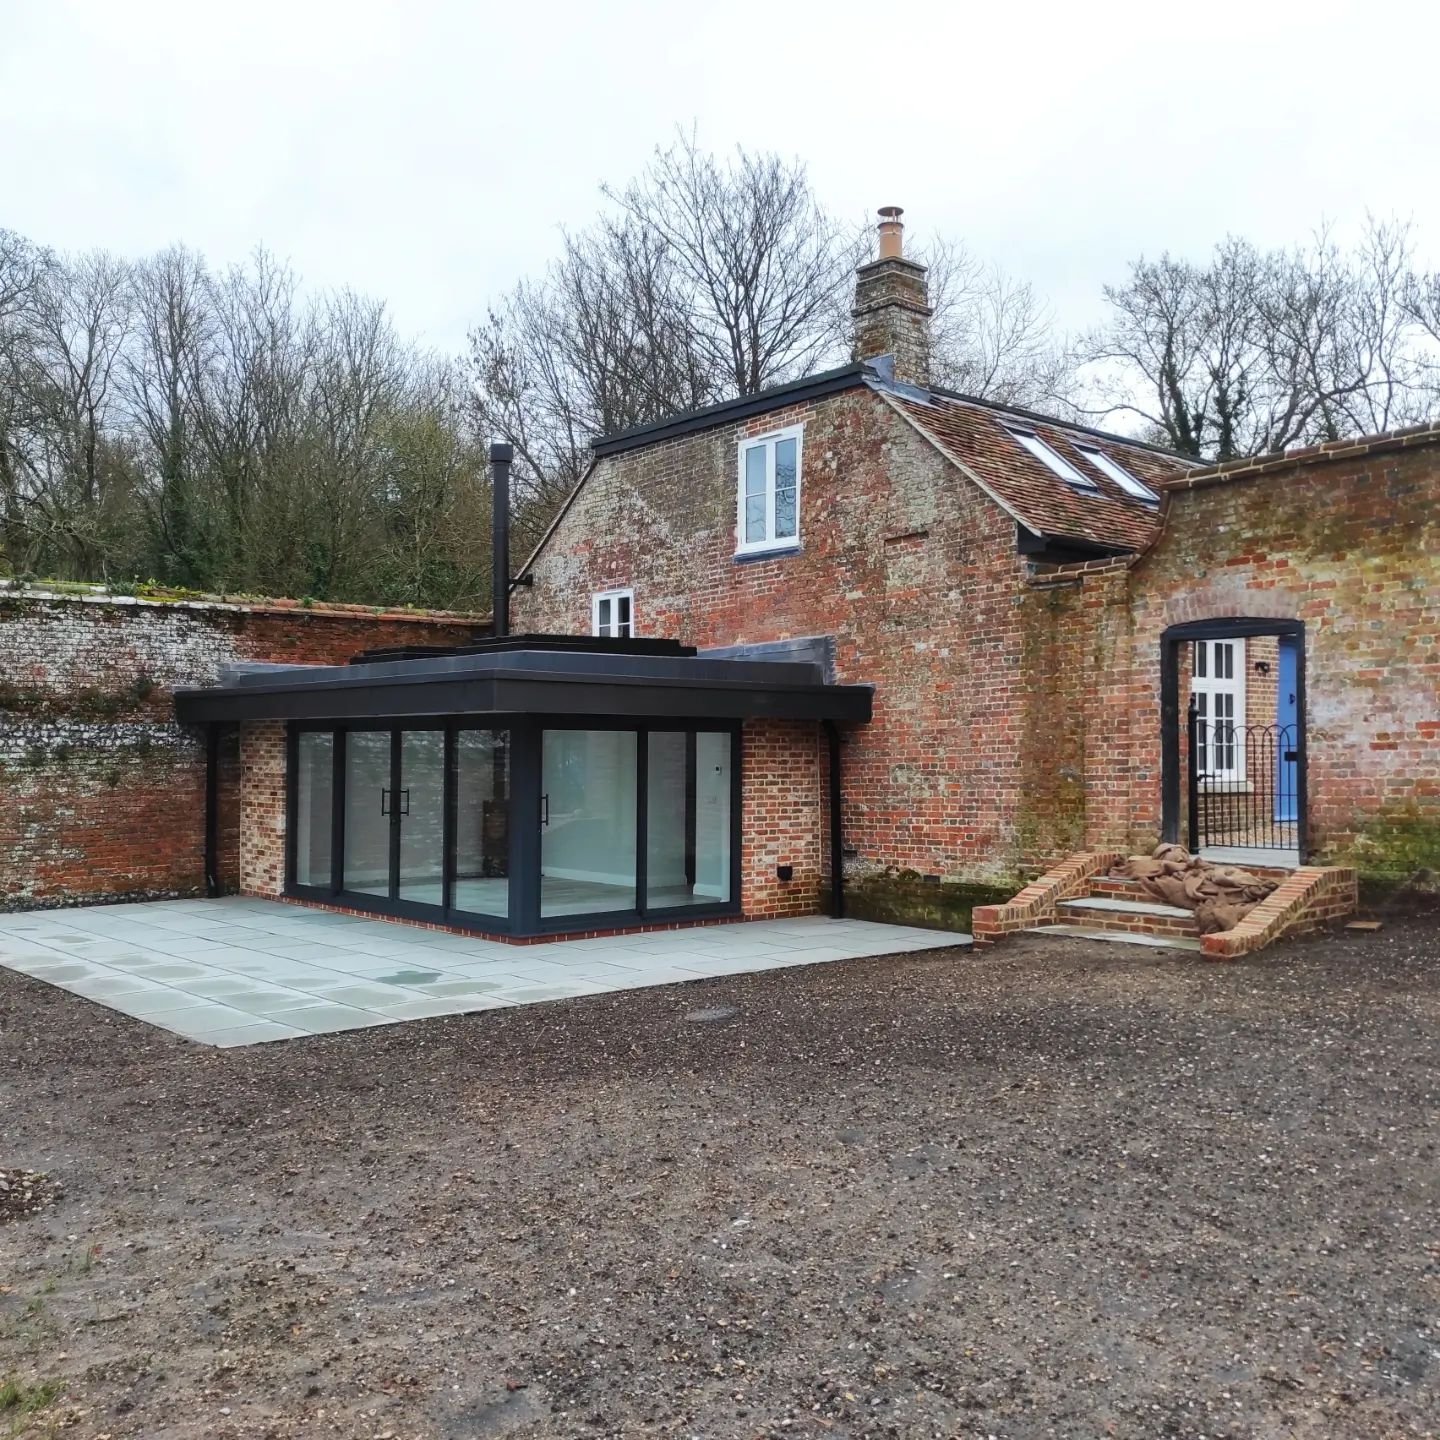 Our latest project to finish on site with @greendaleconstruction. This once derelict agricultural workers cottage has been completely transformed into a 4 bed holiday let. Externally it has retained its heritage with the addition of a contemporary re